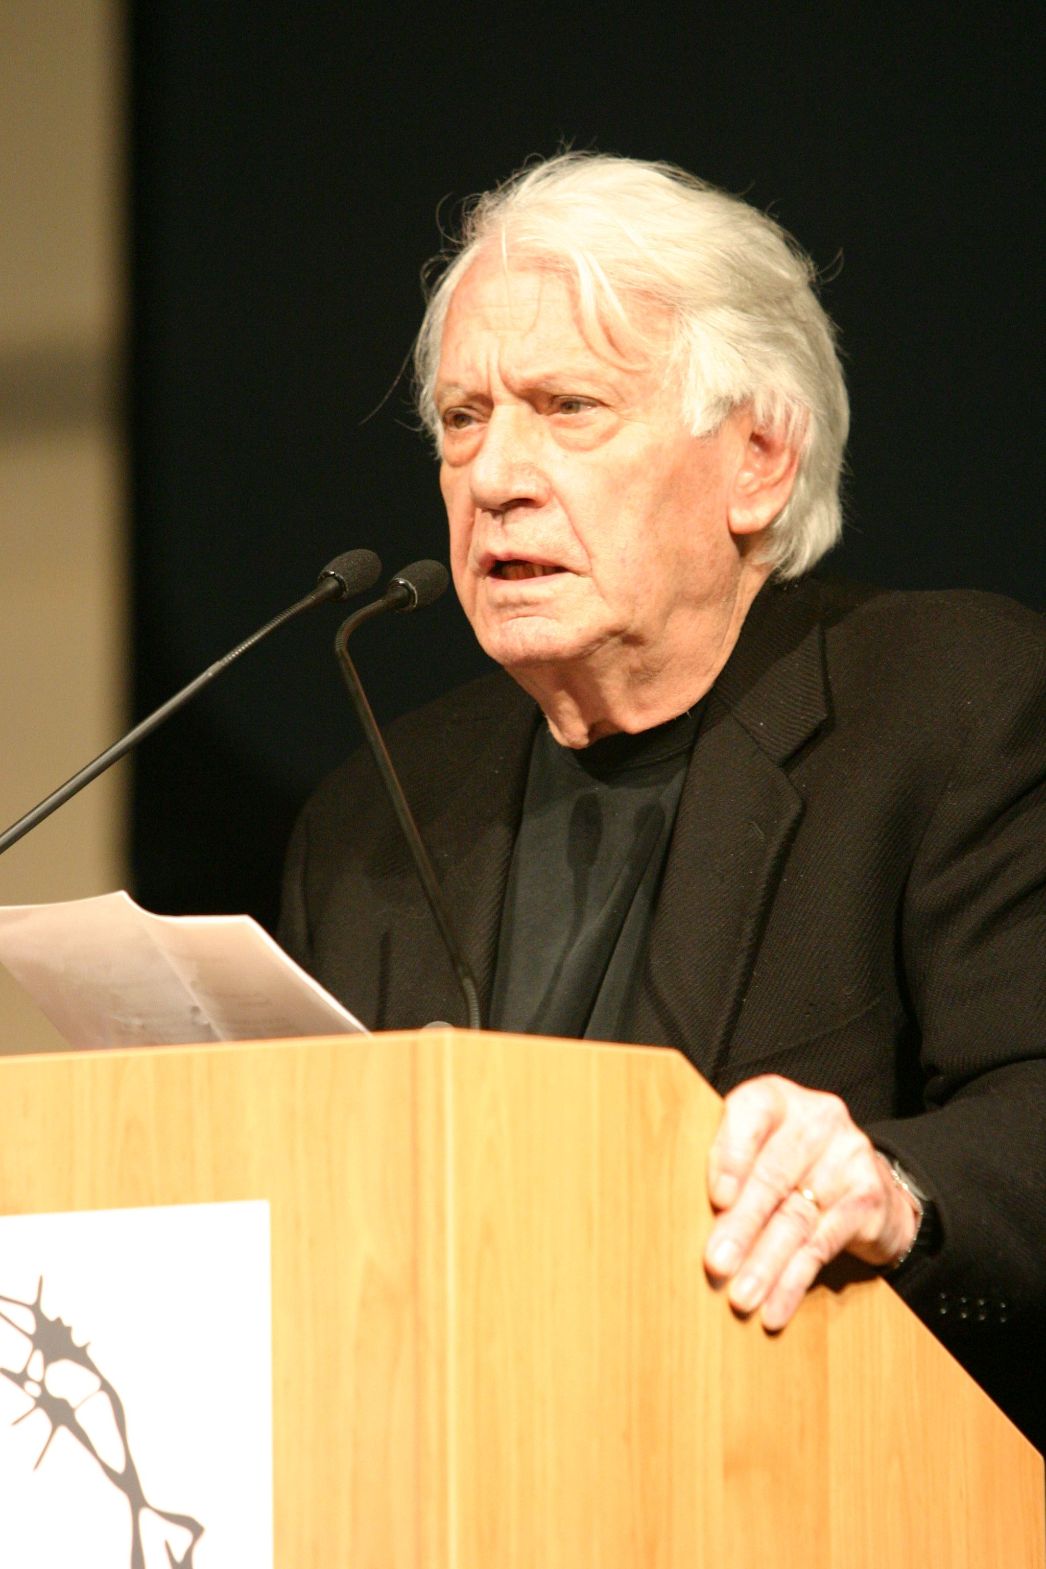 Recording of Jorge Semprún at the lectern